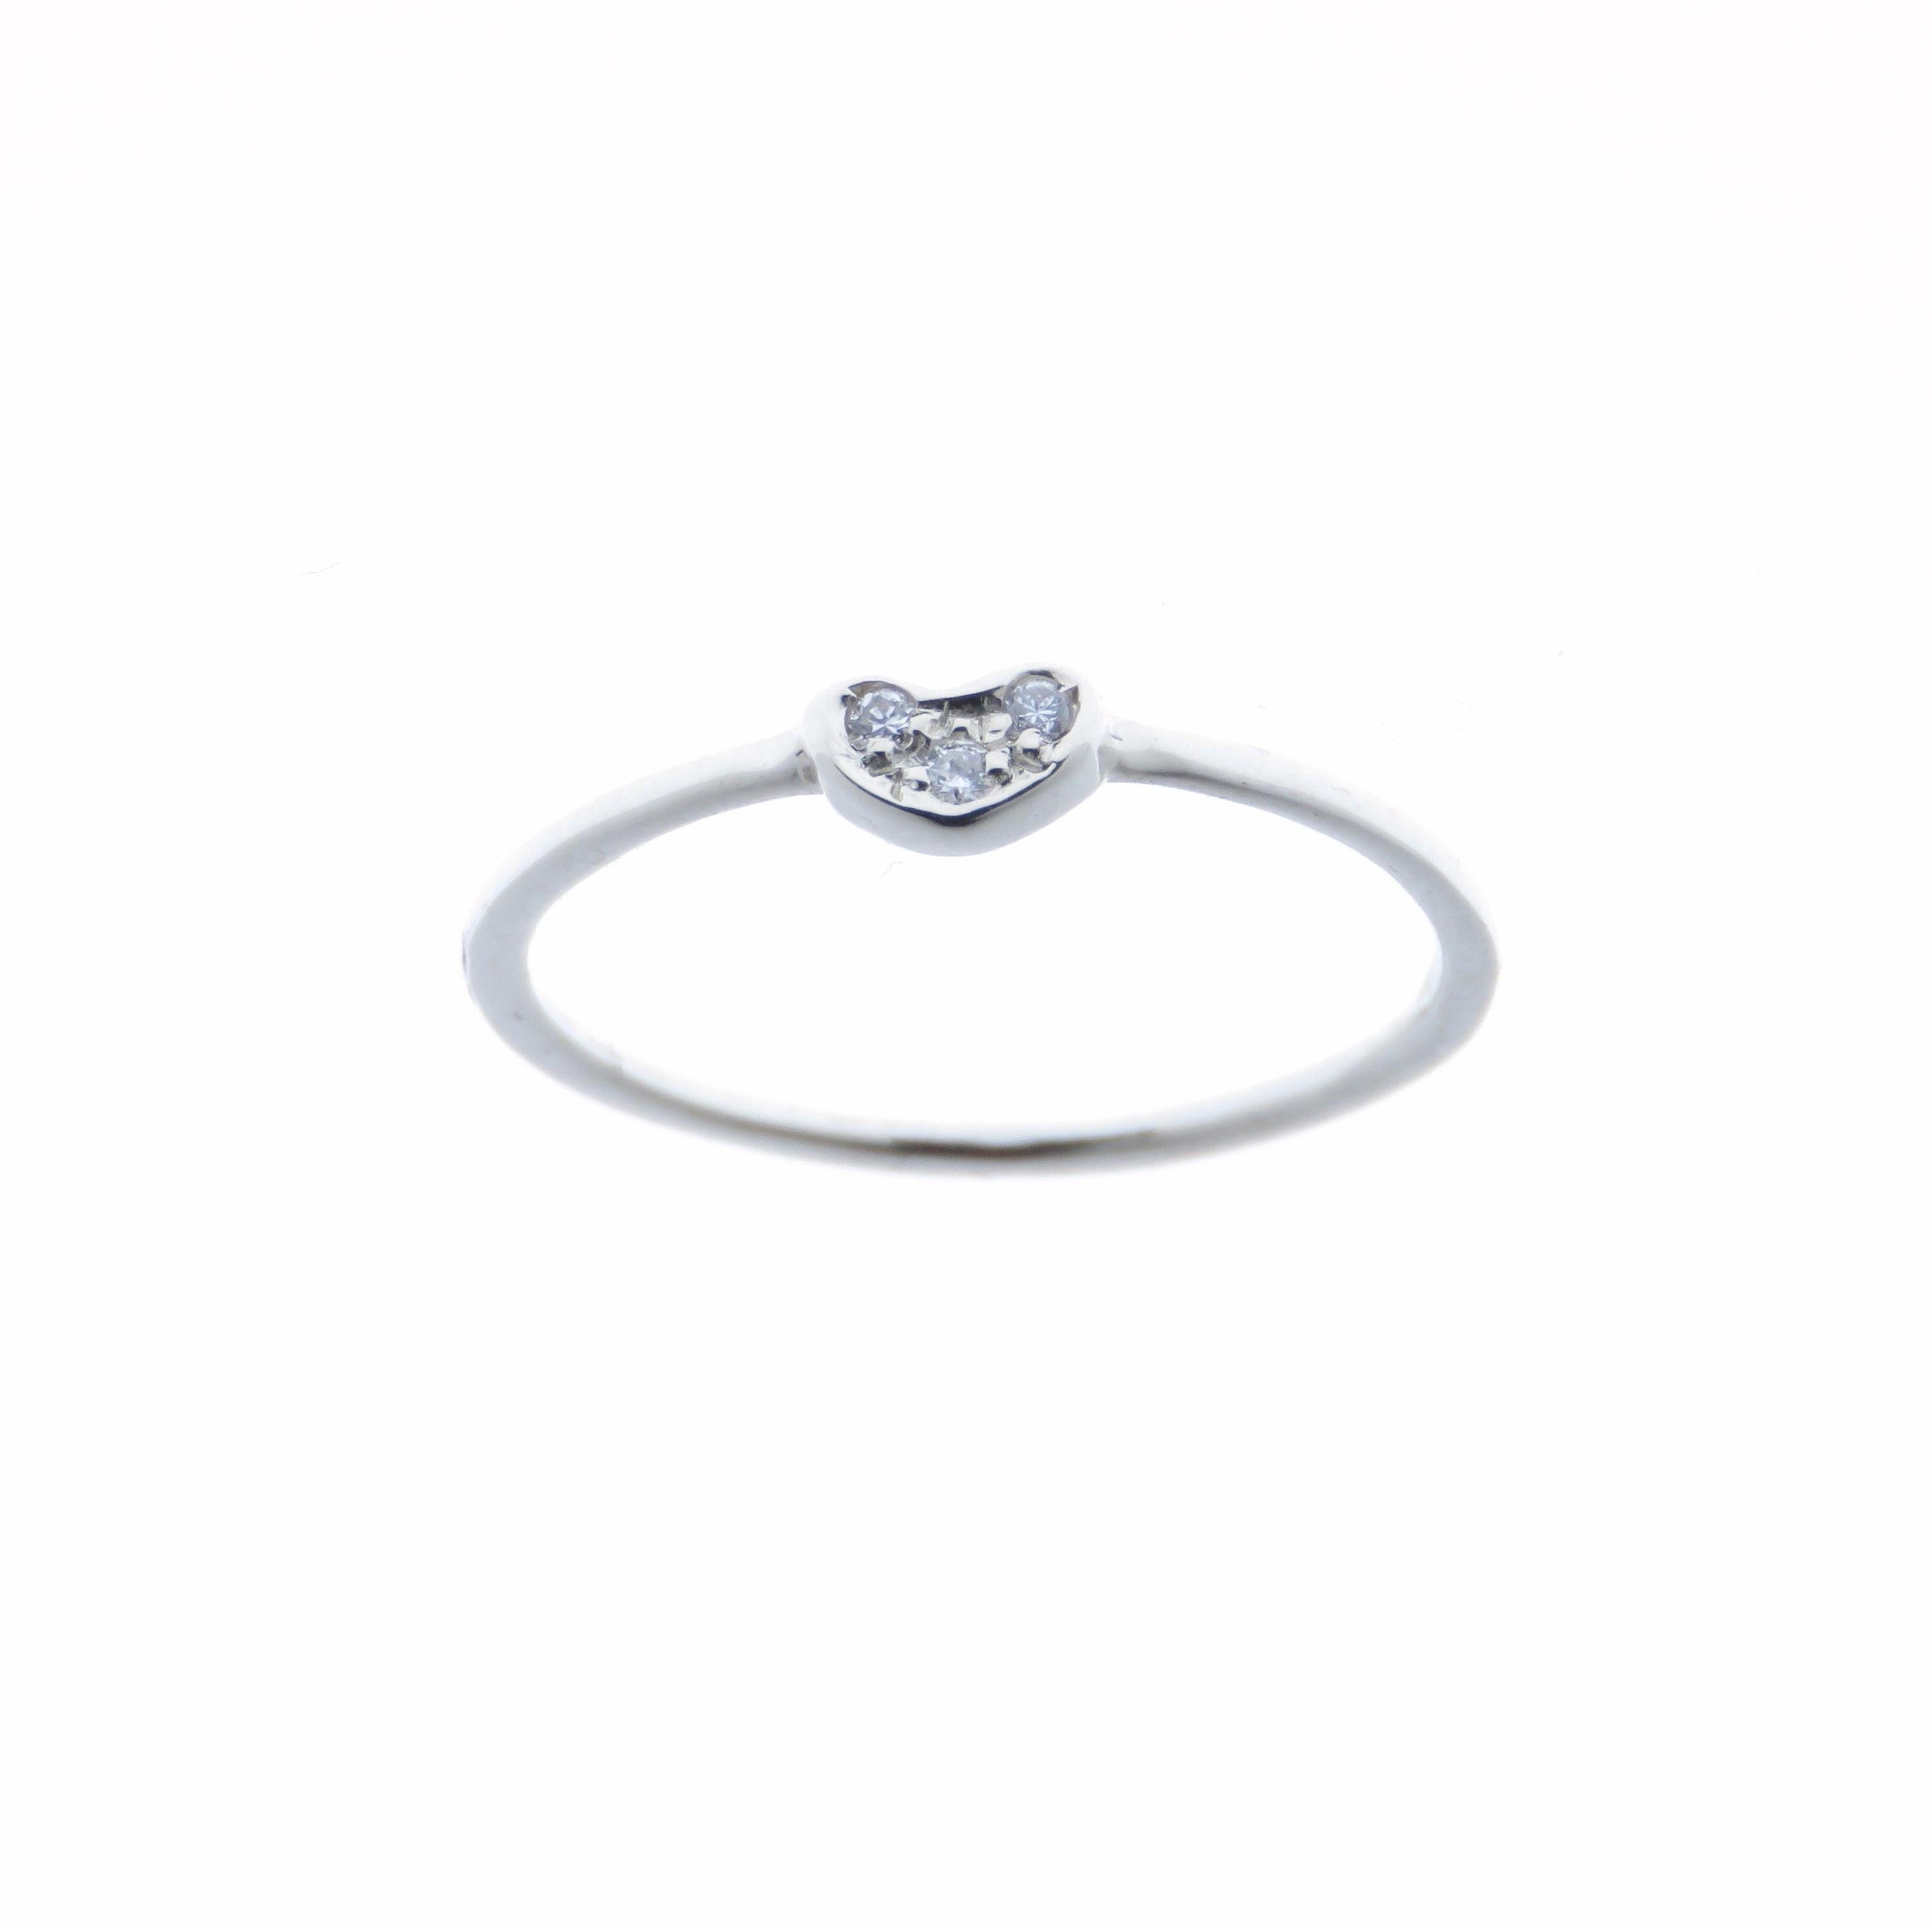 Modern Diamonds White Rose Gold Stacking Ring Handcrafted in Italy by Botta Gioielli For Sale